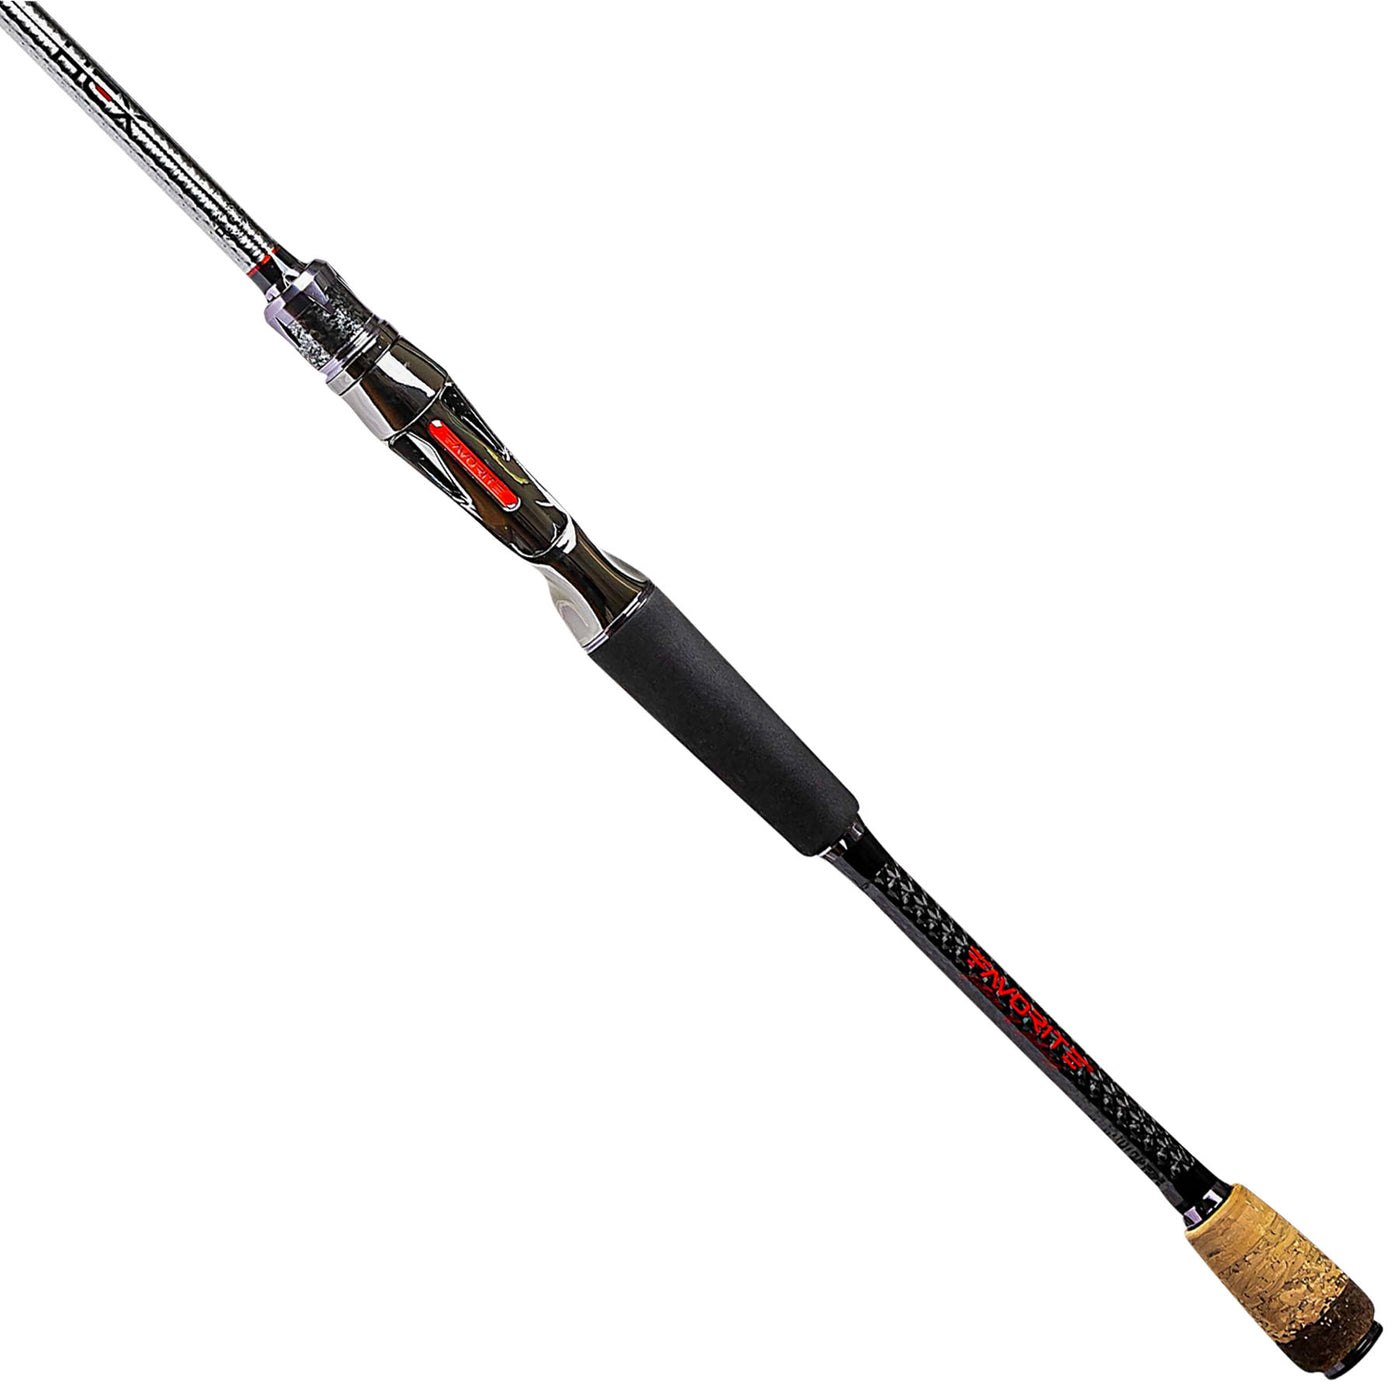 Favorite Fishing Big Sexy Casting Rods - Fin Feather Fur Outfitters